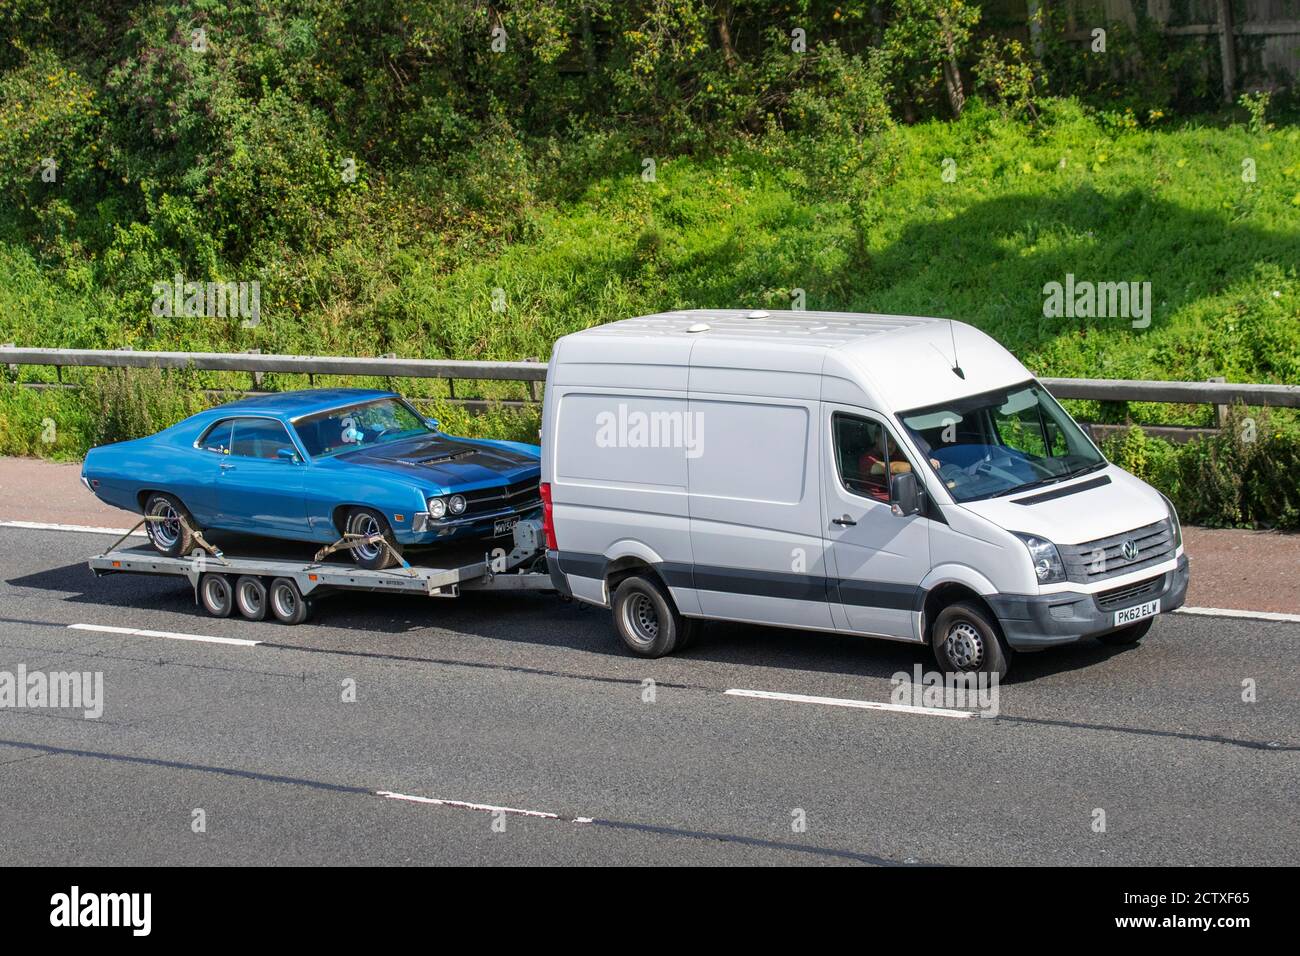 1970 70s blue American Fairlane RamAir 429 on car trailer being towed on tghe M6 motorway near Manchester, UK Stock Photo